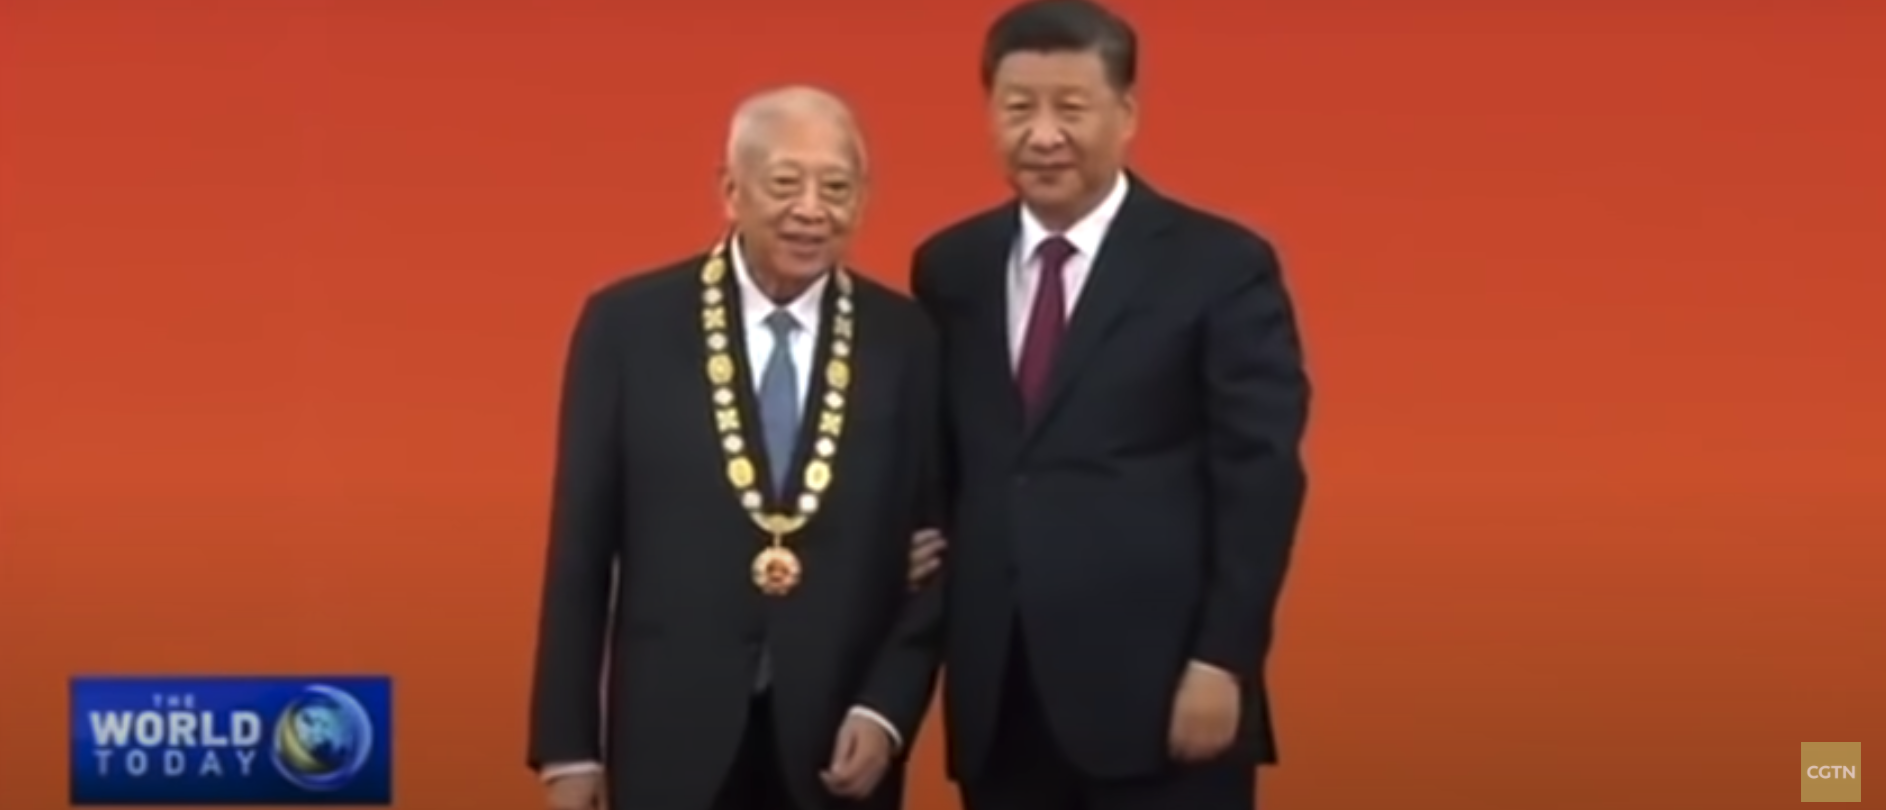 Tung Chee-hwa has met Xi Jinping several times and received a national medal from the General Secretary of the Chinese Communist Party in September 2019. [YouTube/Screenshot/CGTN]